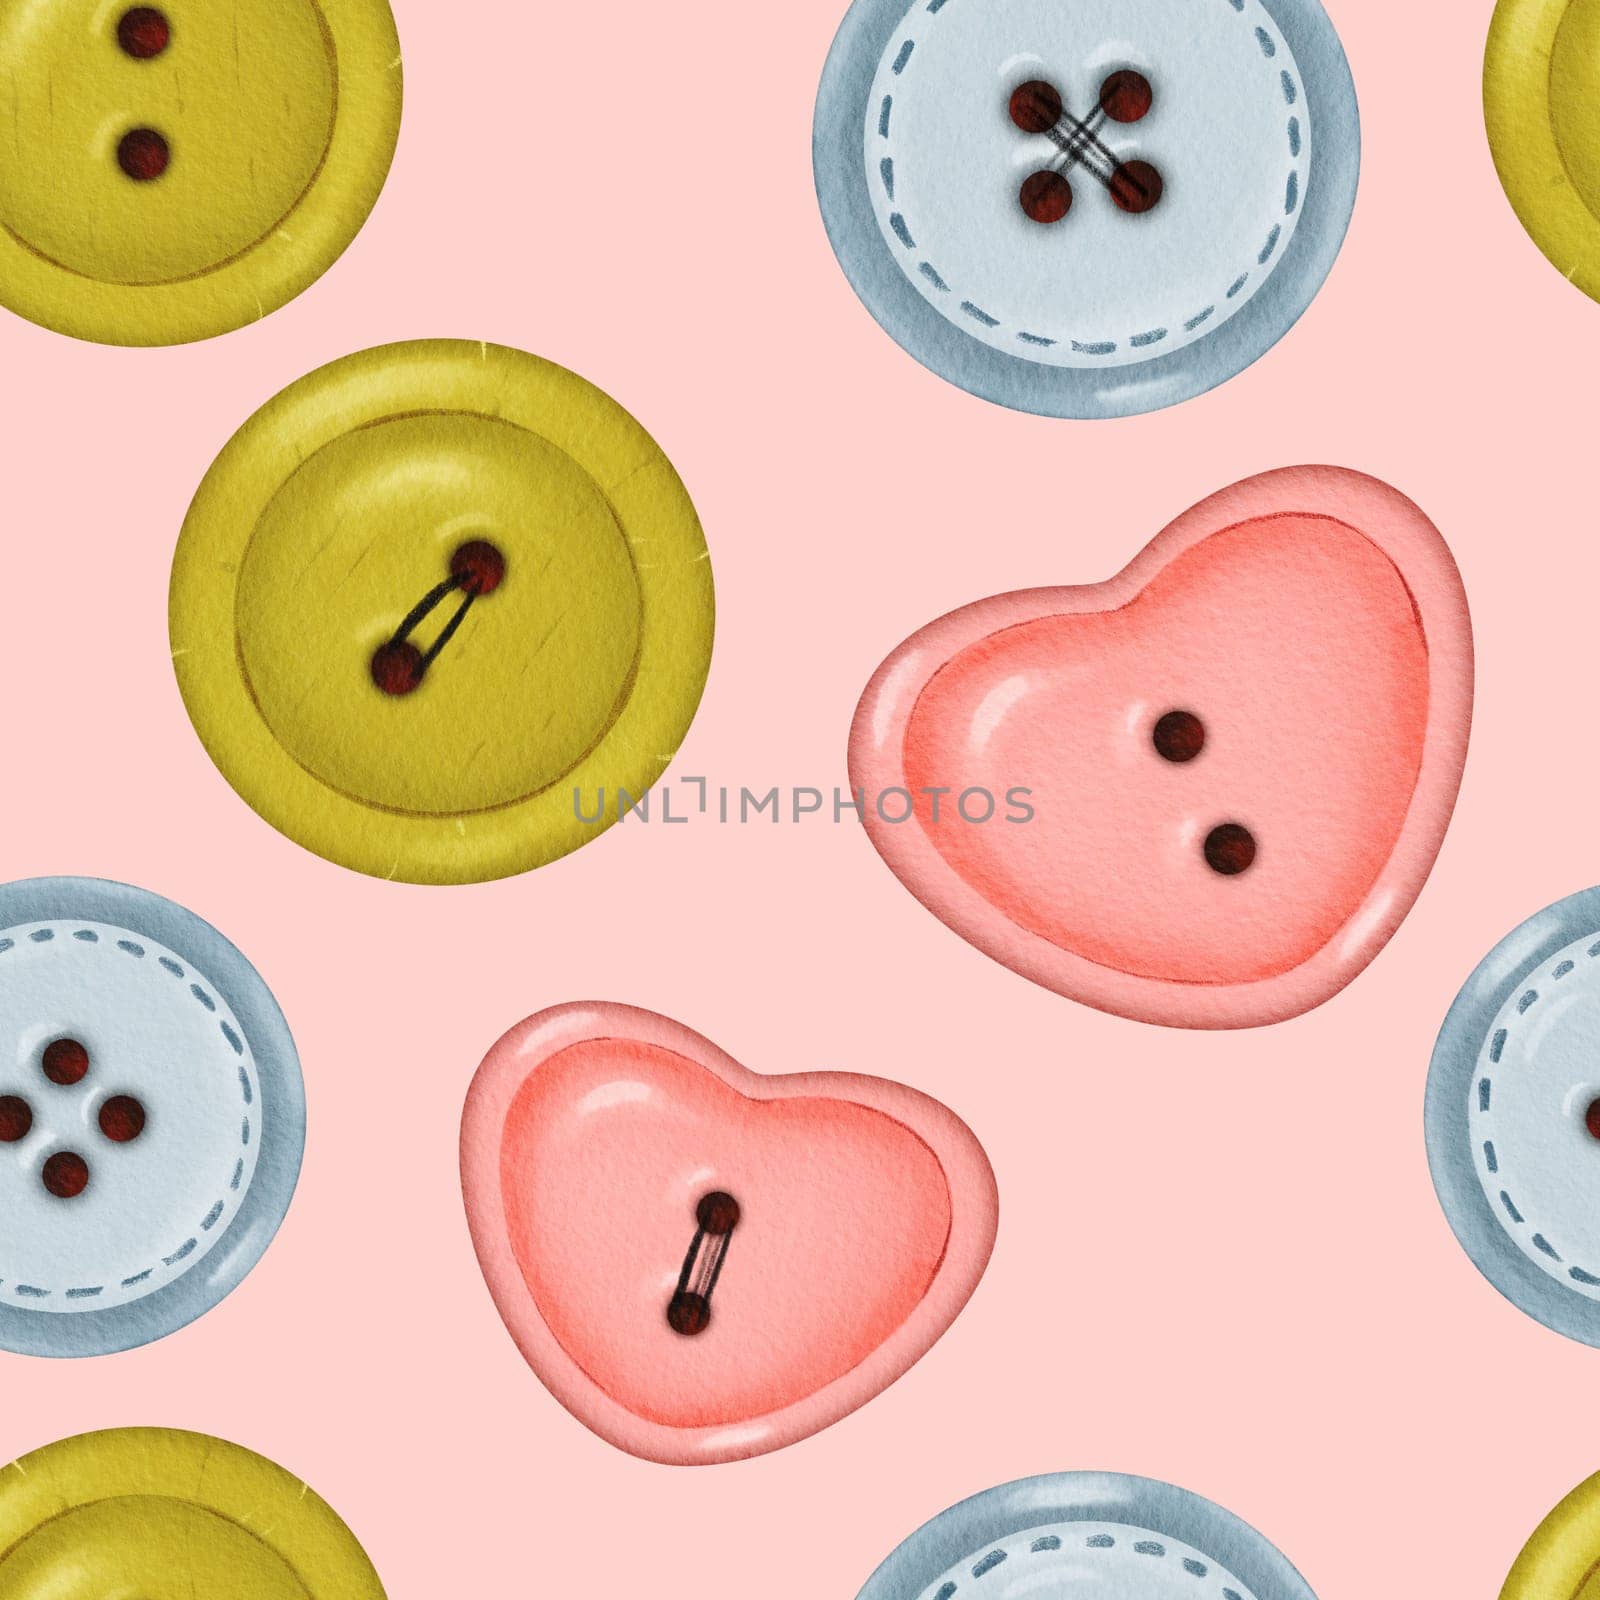 Seamless pattern of buttons in various colors on a light pink background. Buttons of different shapes and shades create a unique design. for decorative projects, cards, gift wrapping, and fabric items.